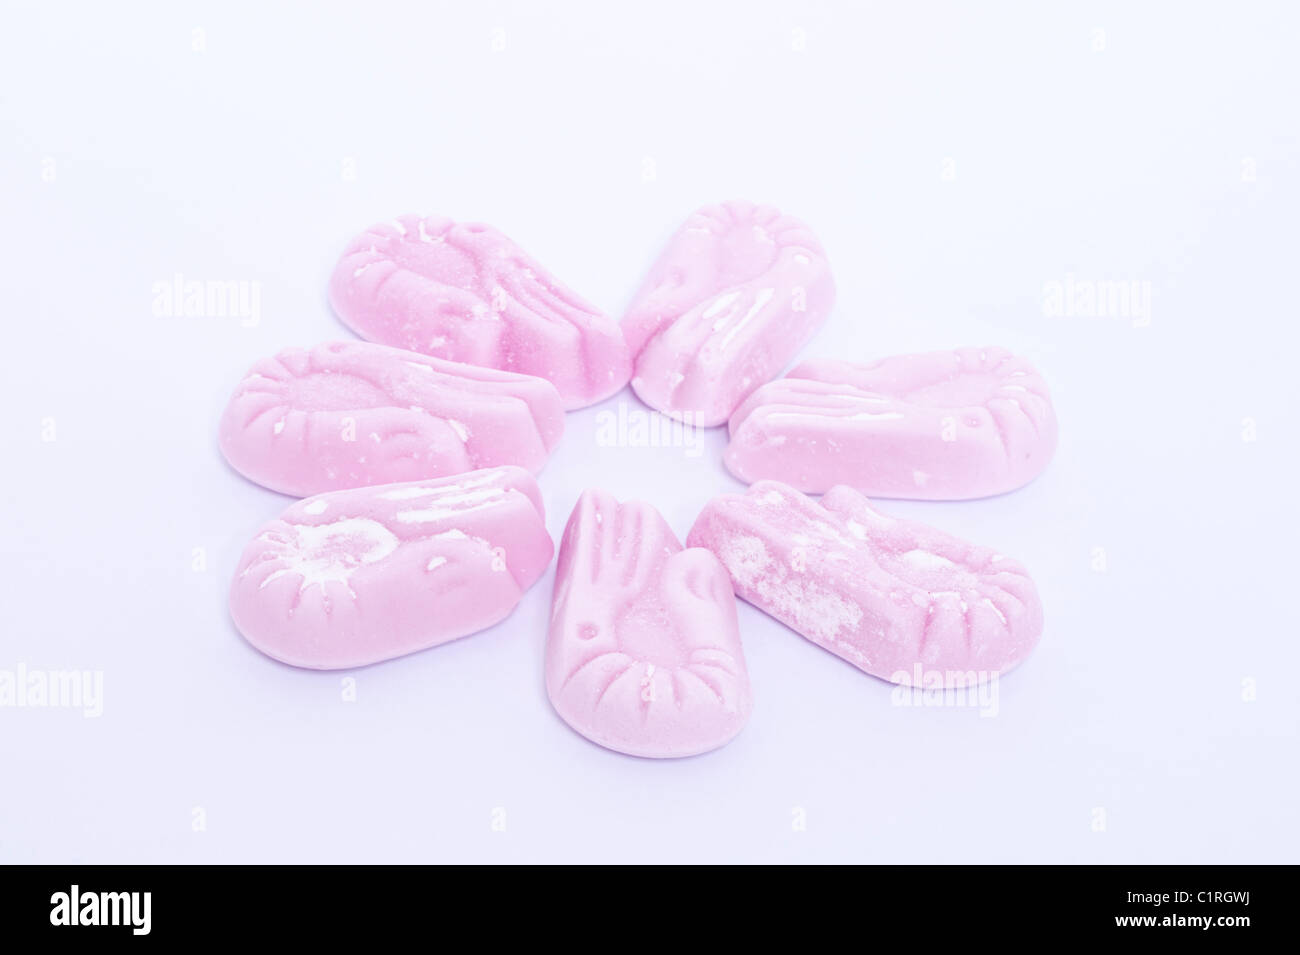 A selection of raspberry flavour shrimps traditional sweets on a white background Stock Photo